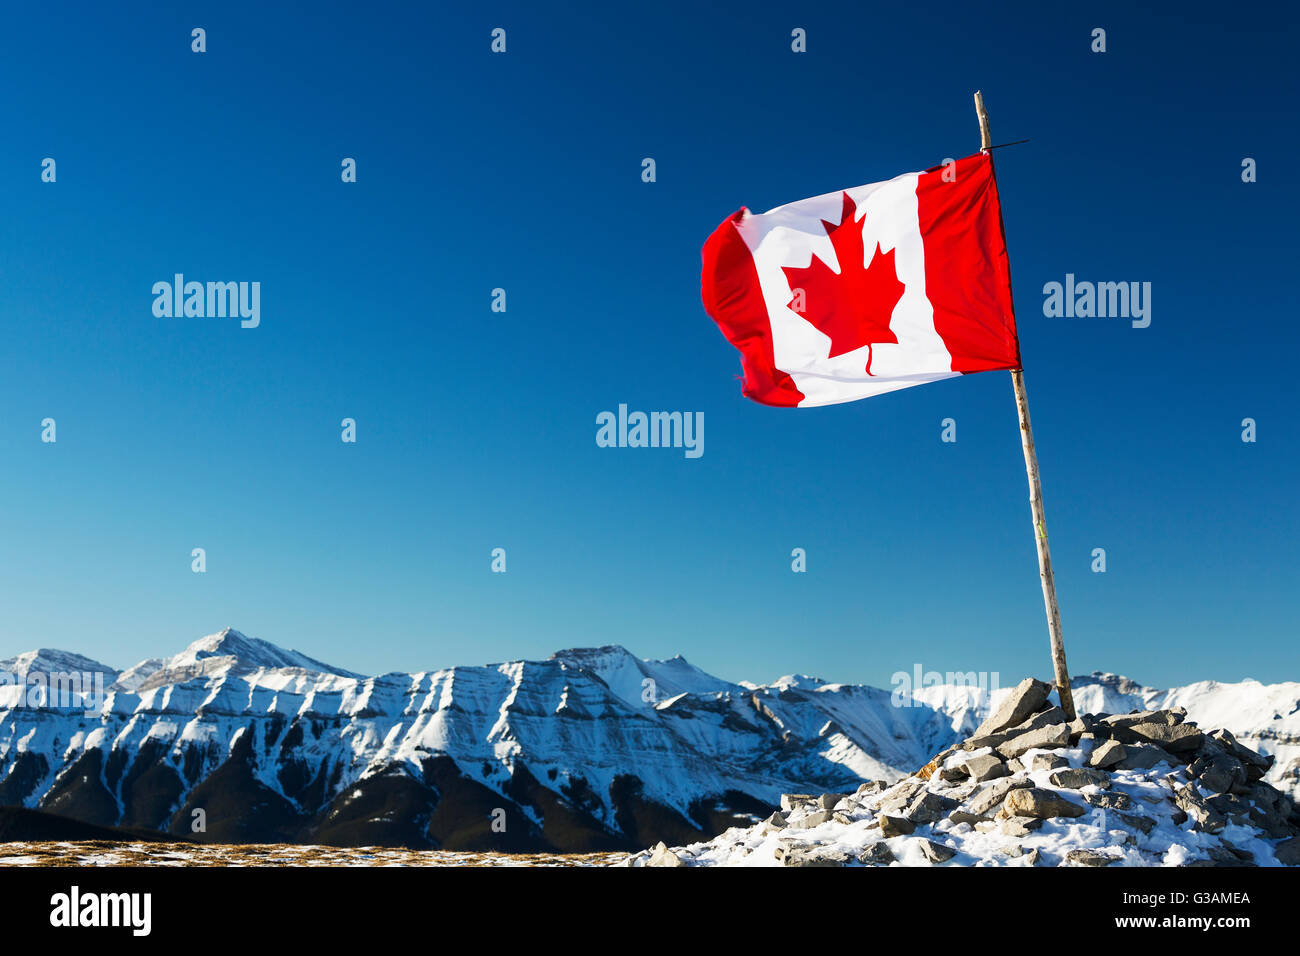 A Canadian Flag Blowing In The Wind Attached To A Wooden Branch Mounted By Snow Covered Rocks On Top Of A Mountain With Snow Covered Mountain Range... Stock Photo